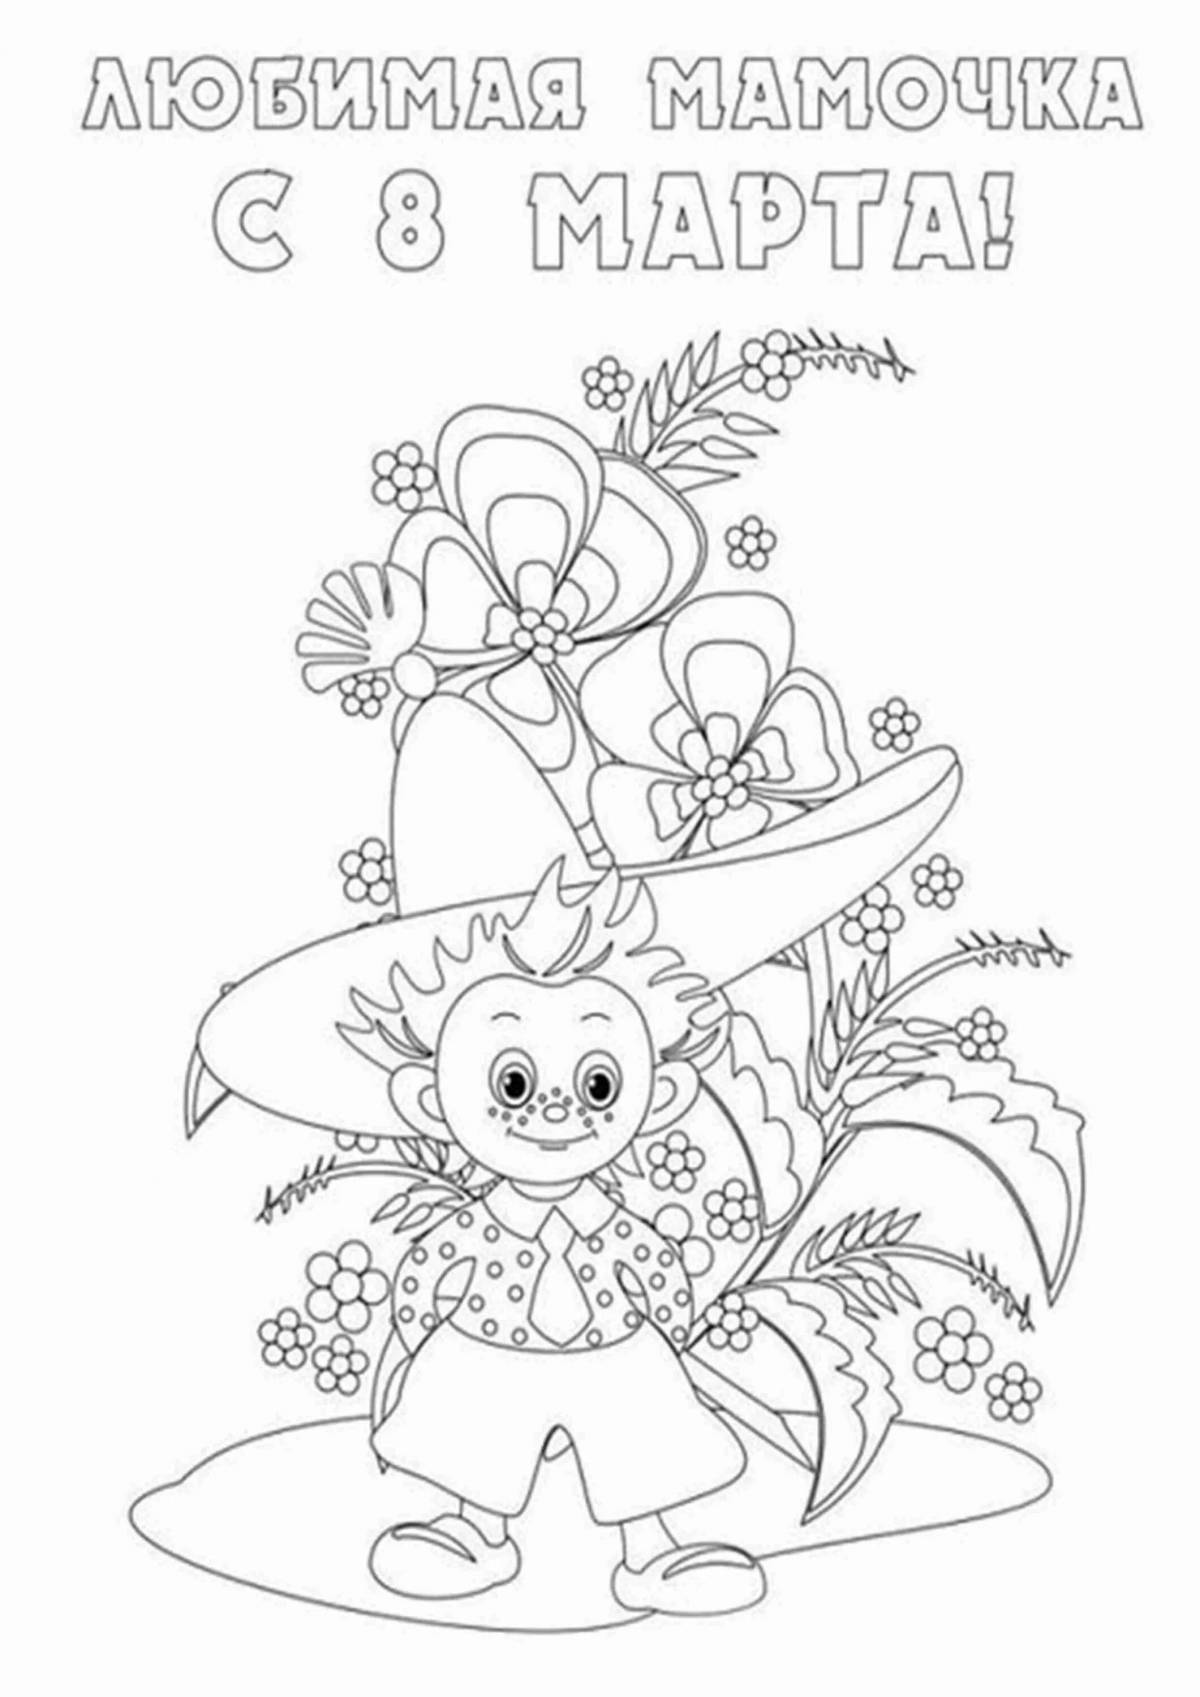 Playful coloring March 8 for children 6-7 years old